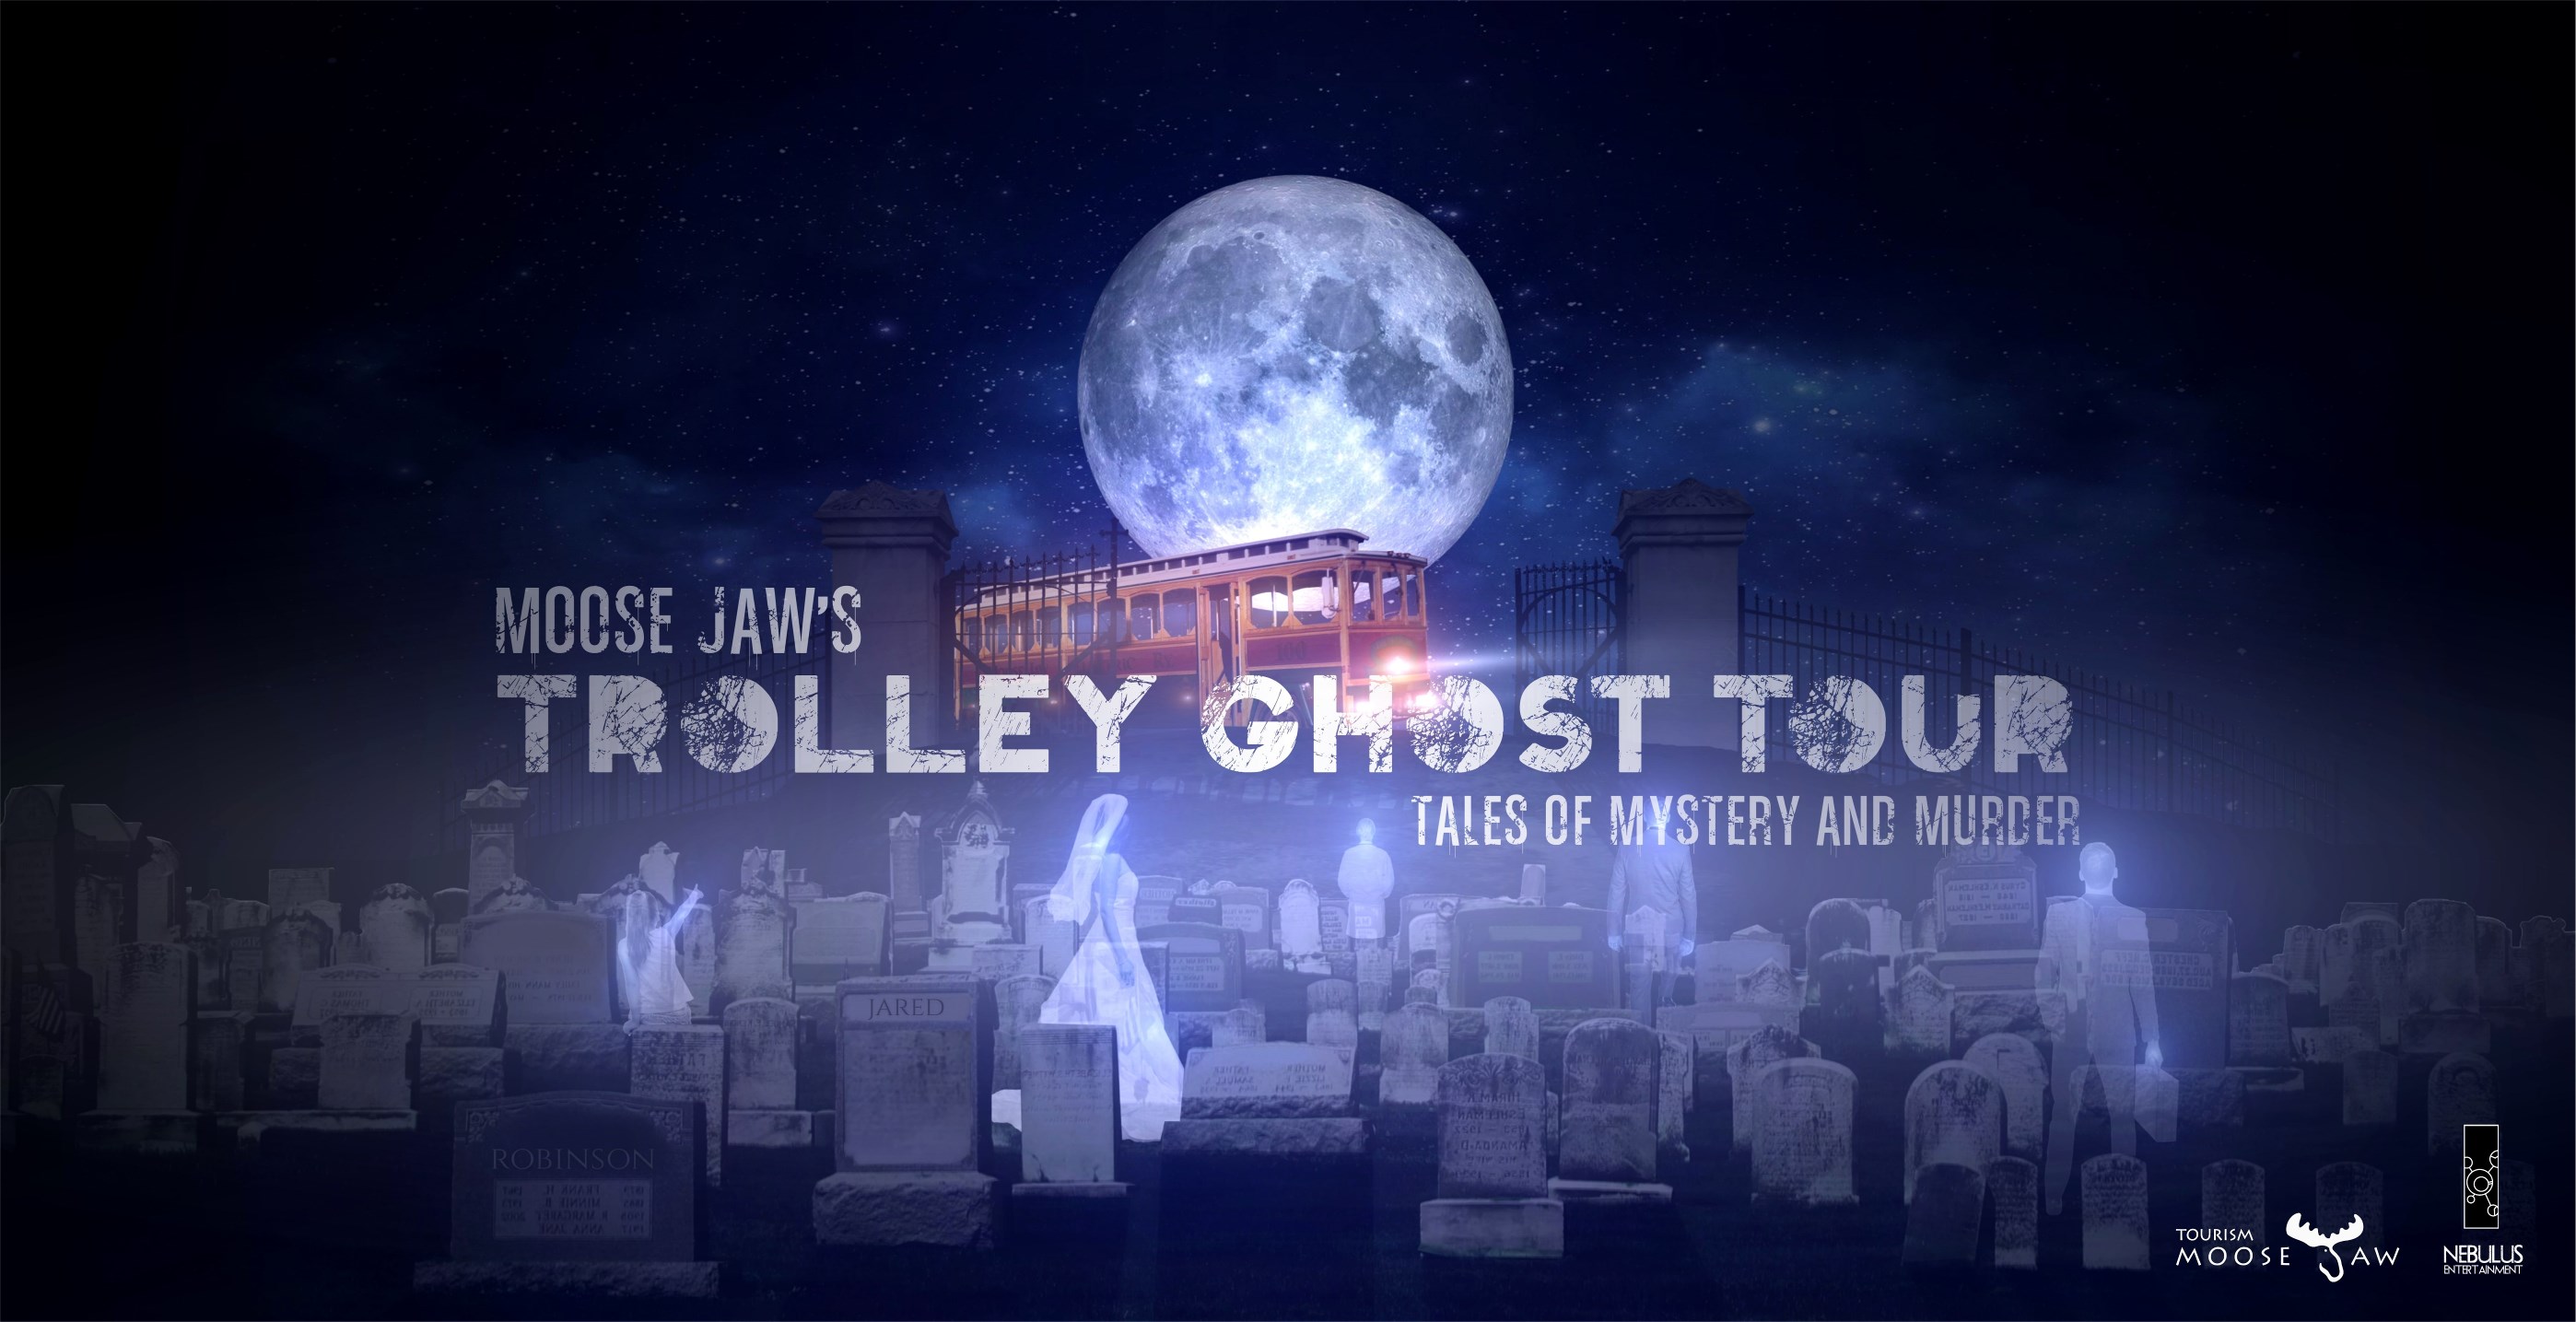 MOOSE JAW TROLLEY GHOST TOUR